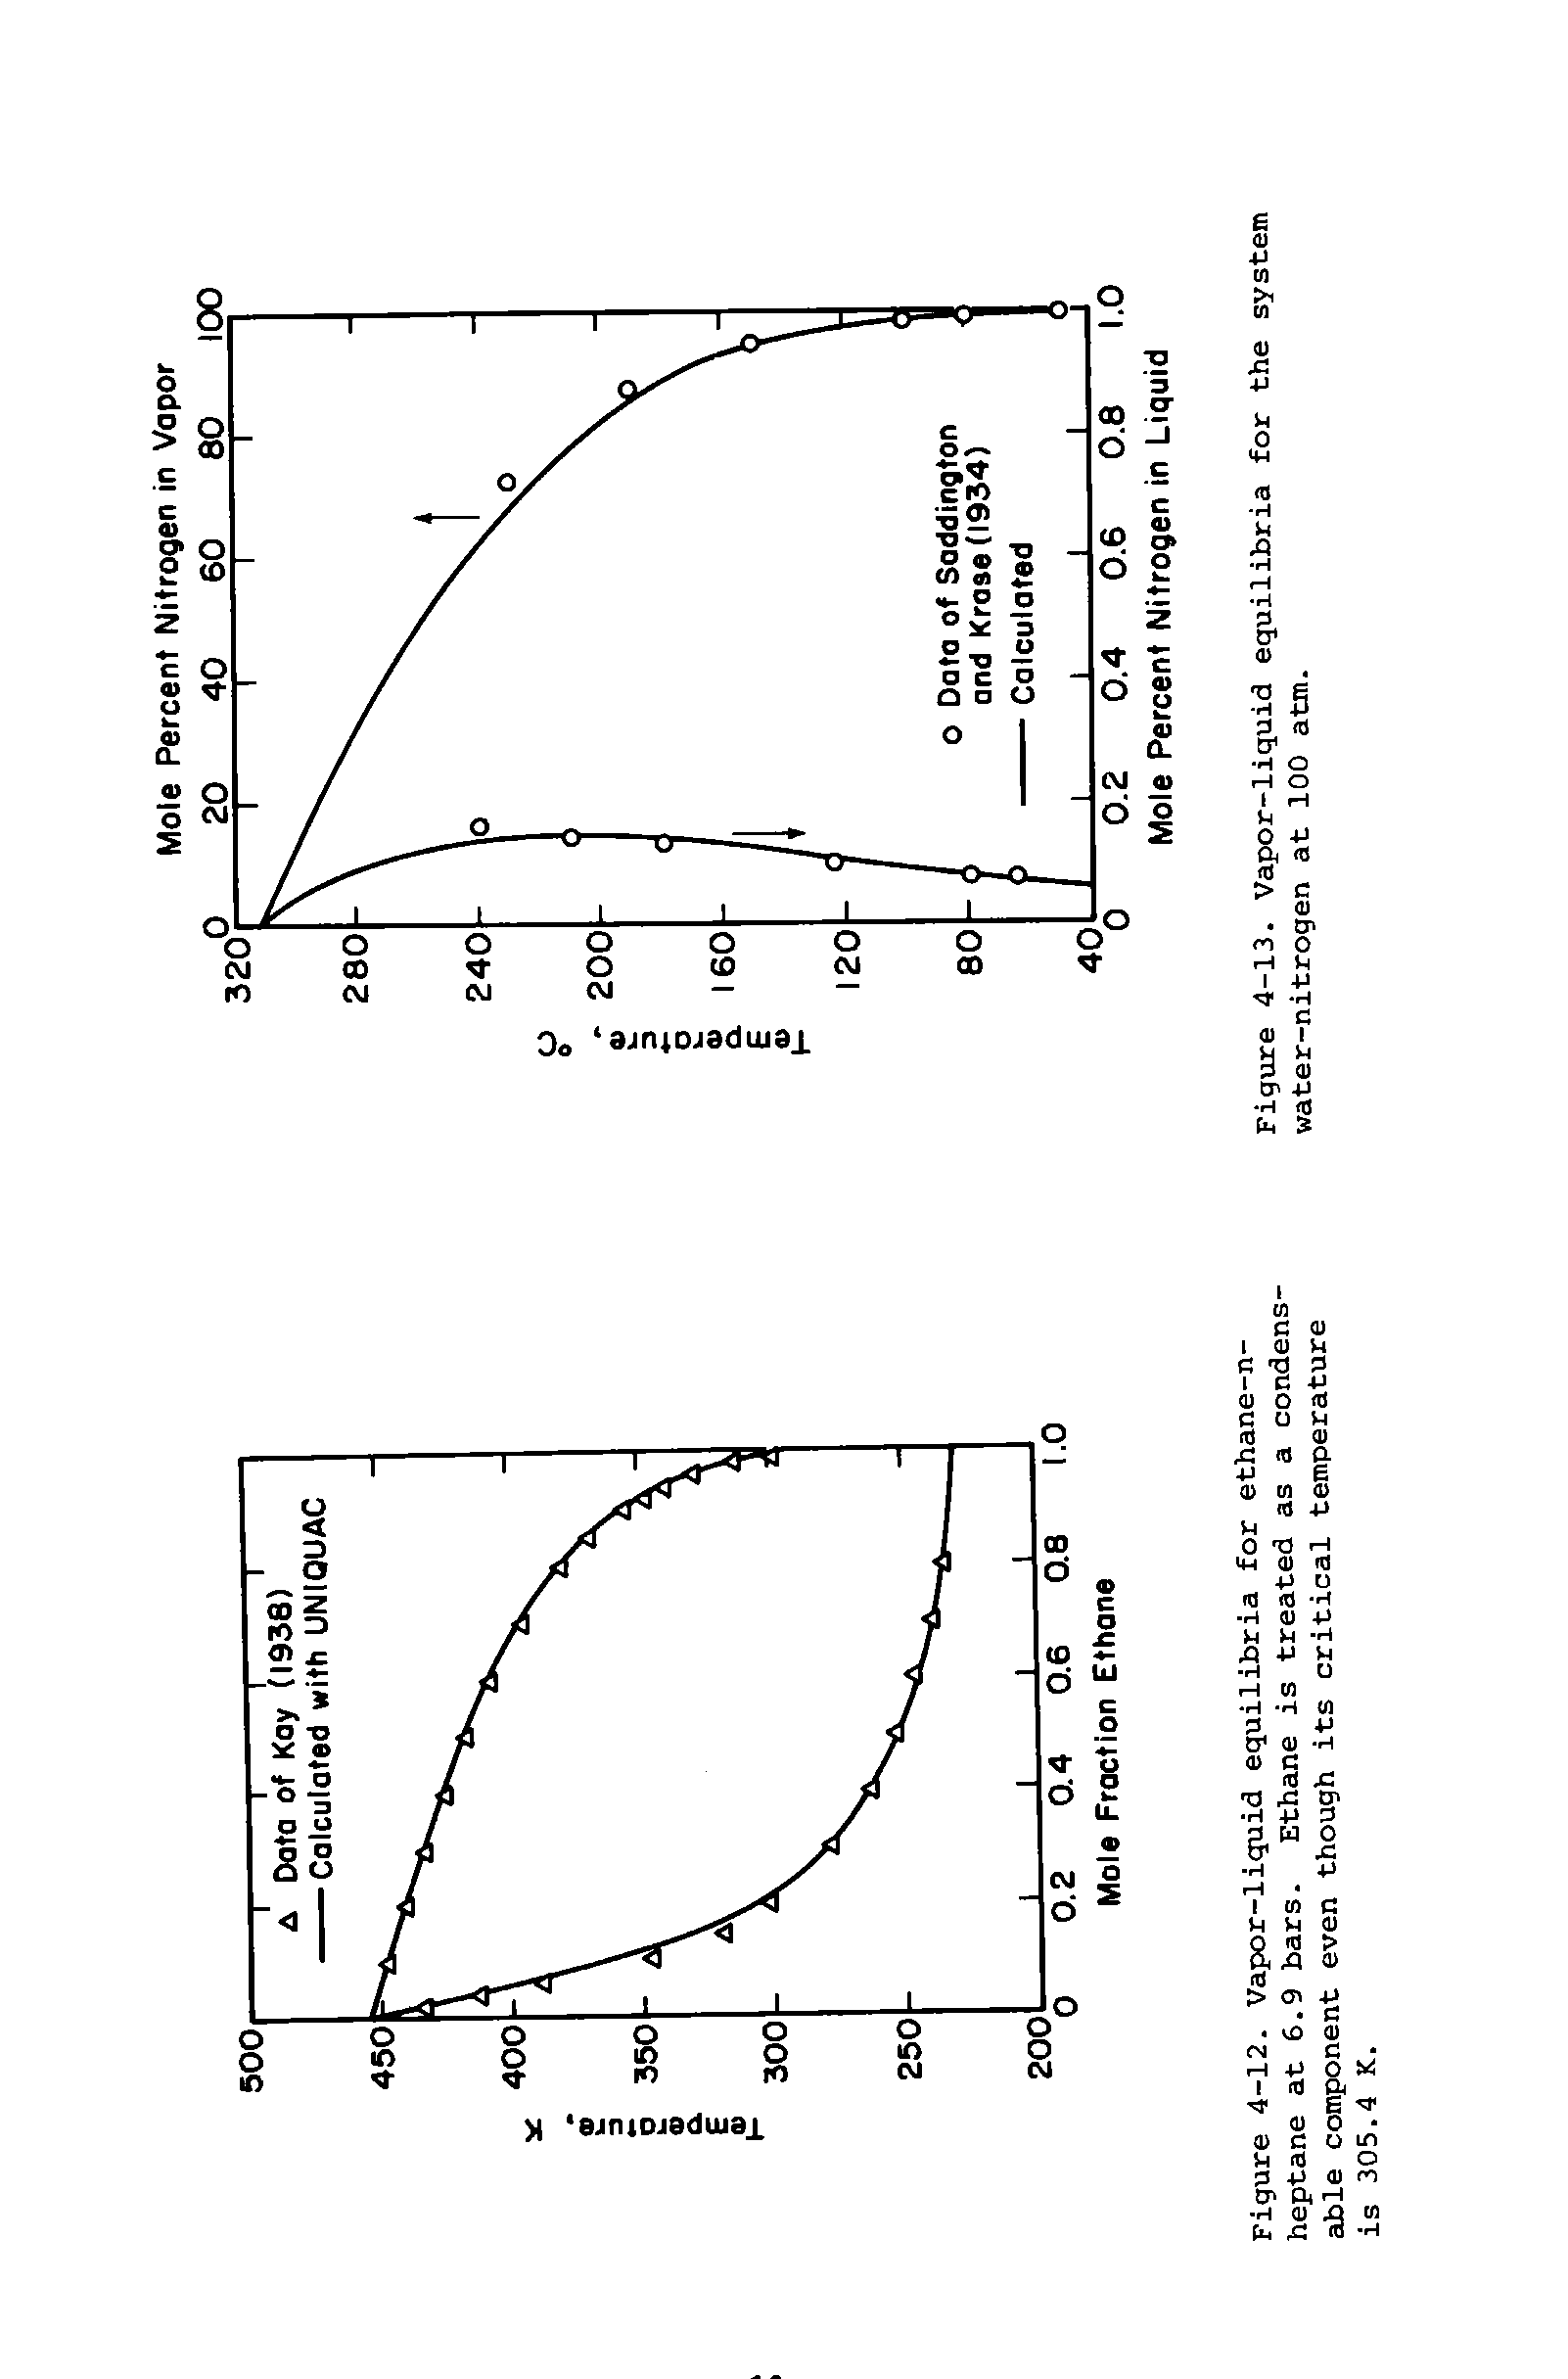 Figure 4-12. Vapor-liquid equilibria for ethane-n-heptane at 6.9 bars. Ethane is treated as a condensable component even though its critical temperature is 305.4 K.